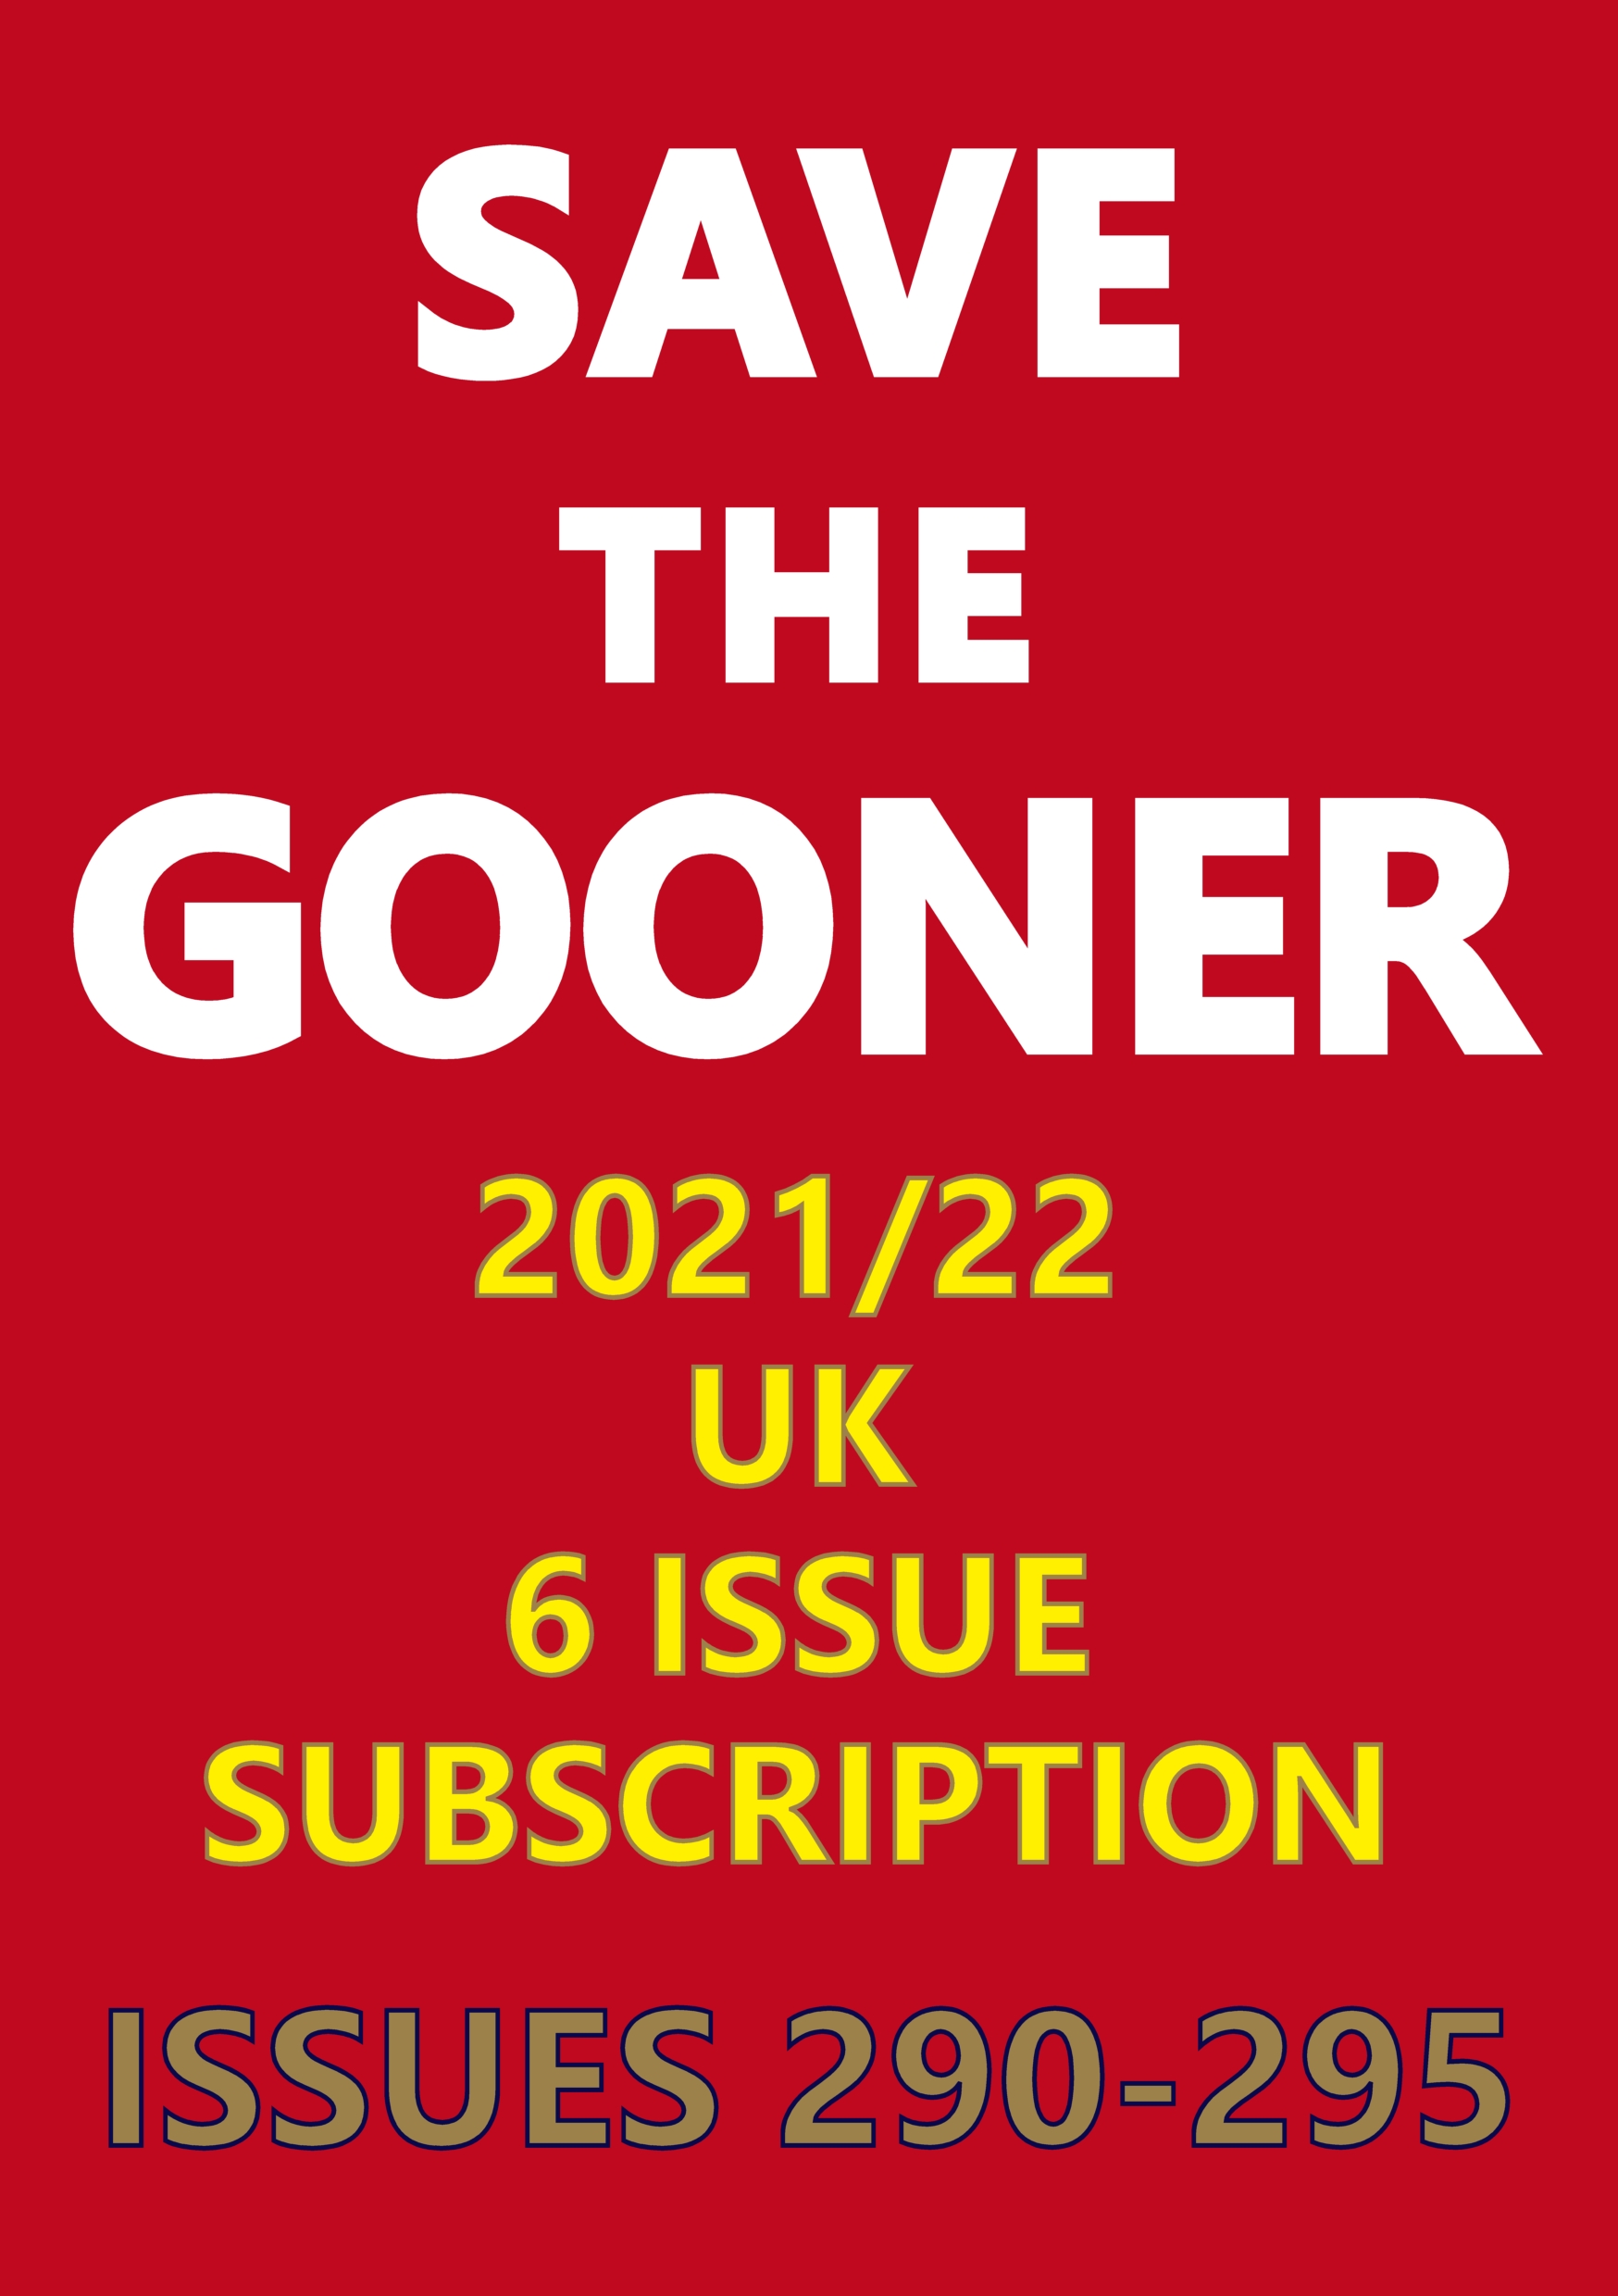 Save The Gooner 2021/22 subscription (UK 1 Year)